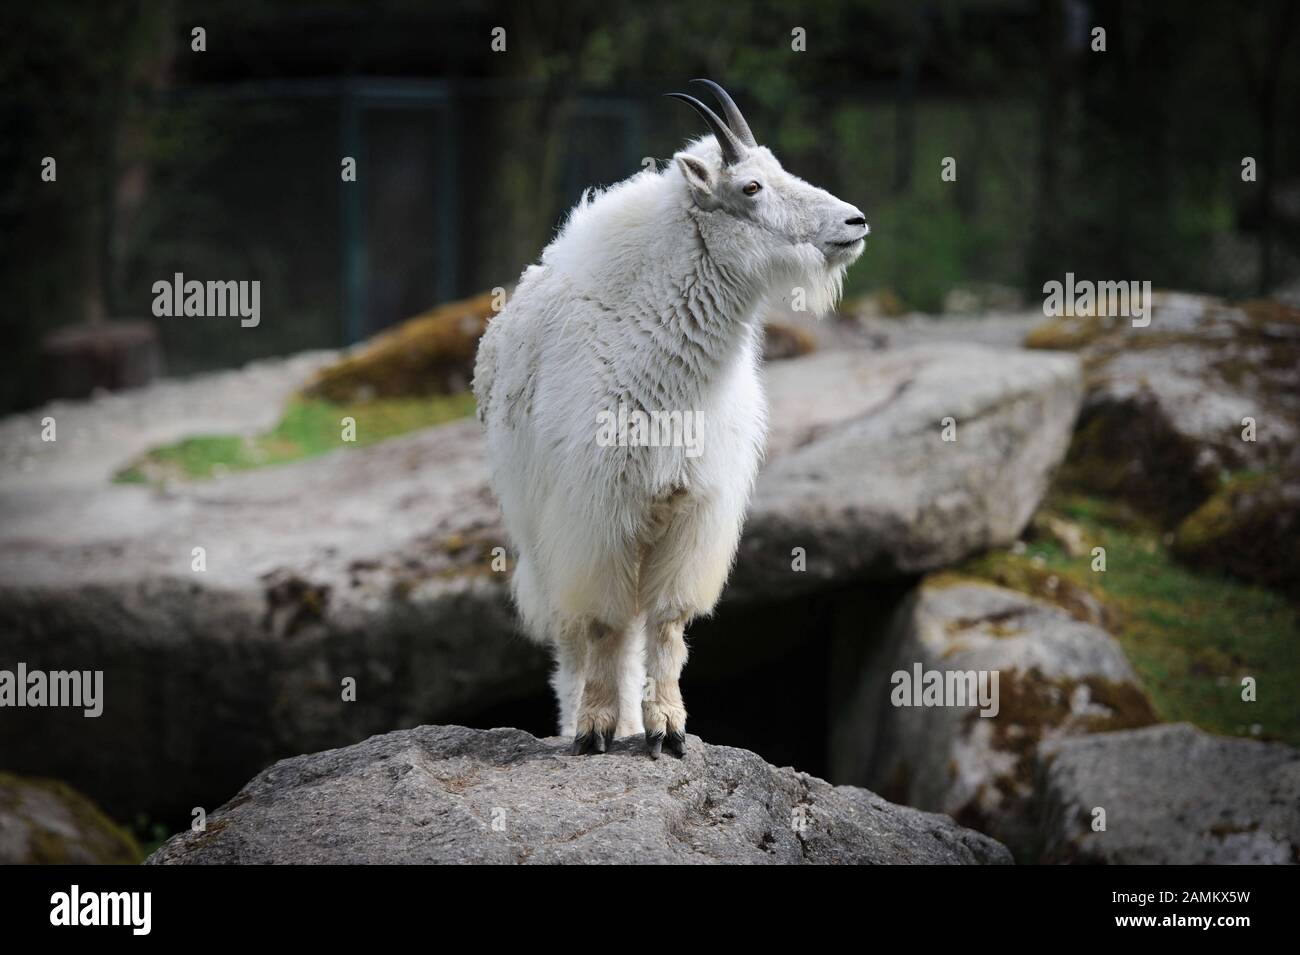 Snow goat in the Munich zoo Hellabrunn. [automated translation] Stock Photo